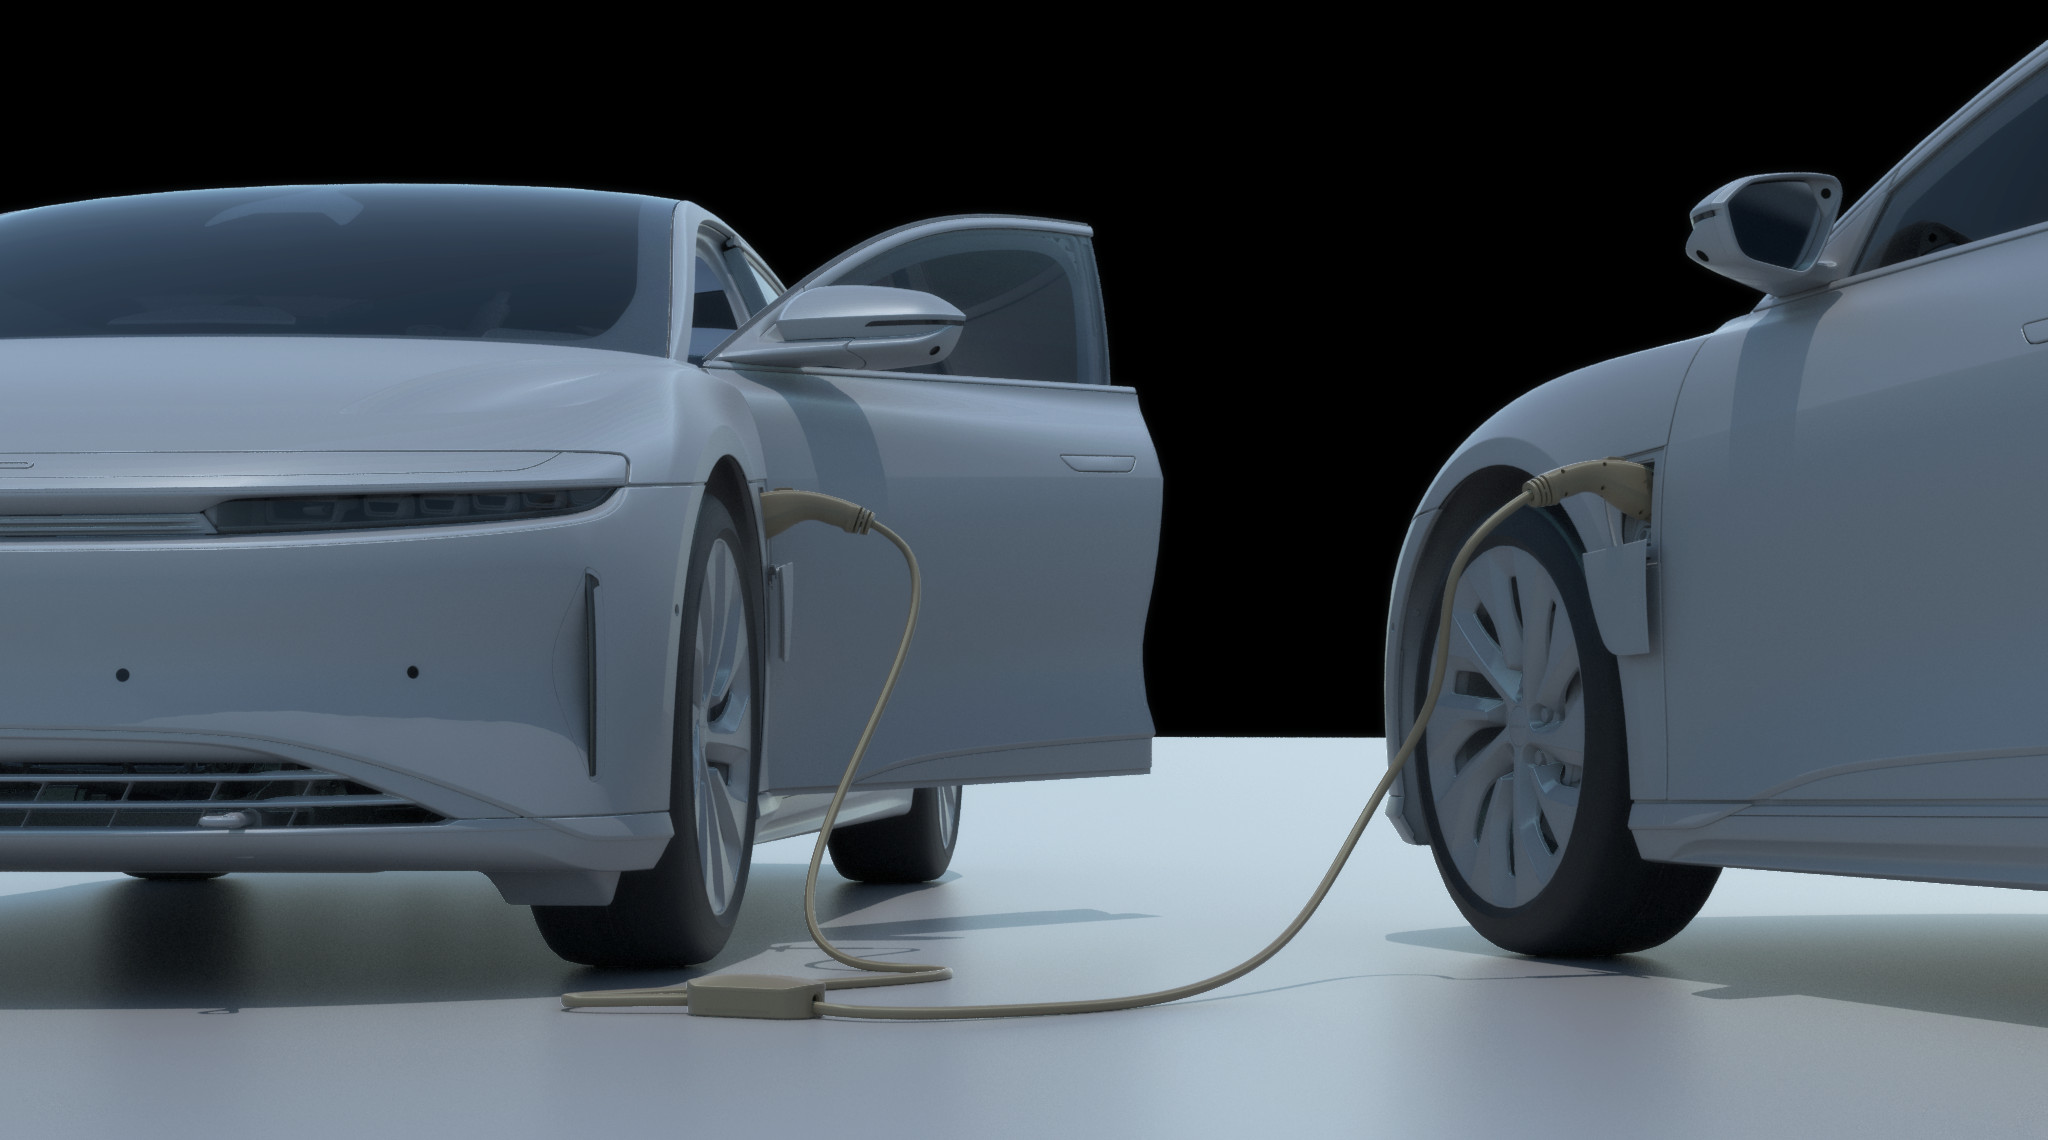 More sausage-making / behind the scenes: This shows how using a bezier deformer combined with some procedural geometry leads to an *easily* art-directable EV charging cable.